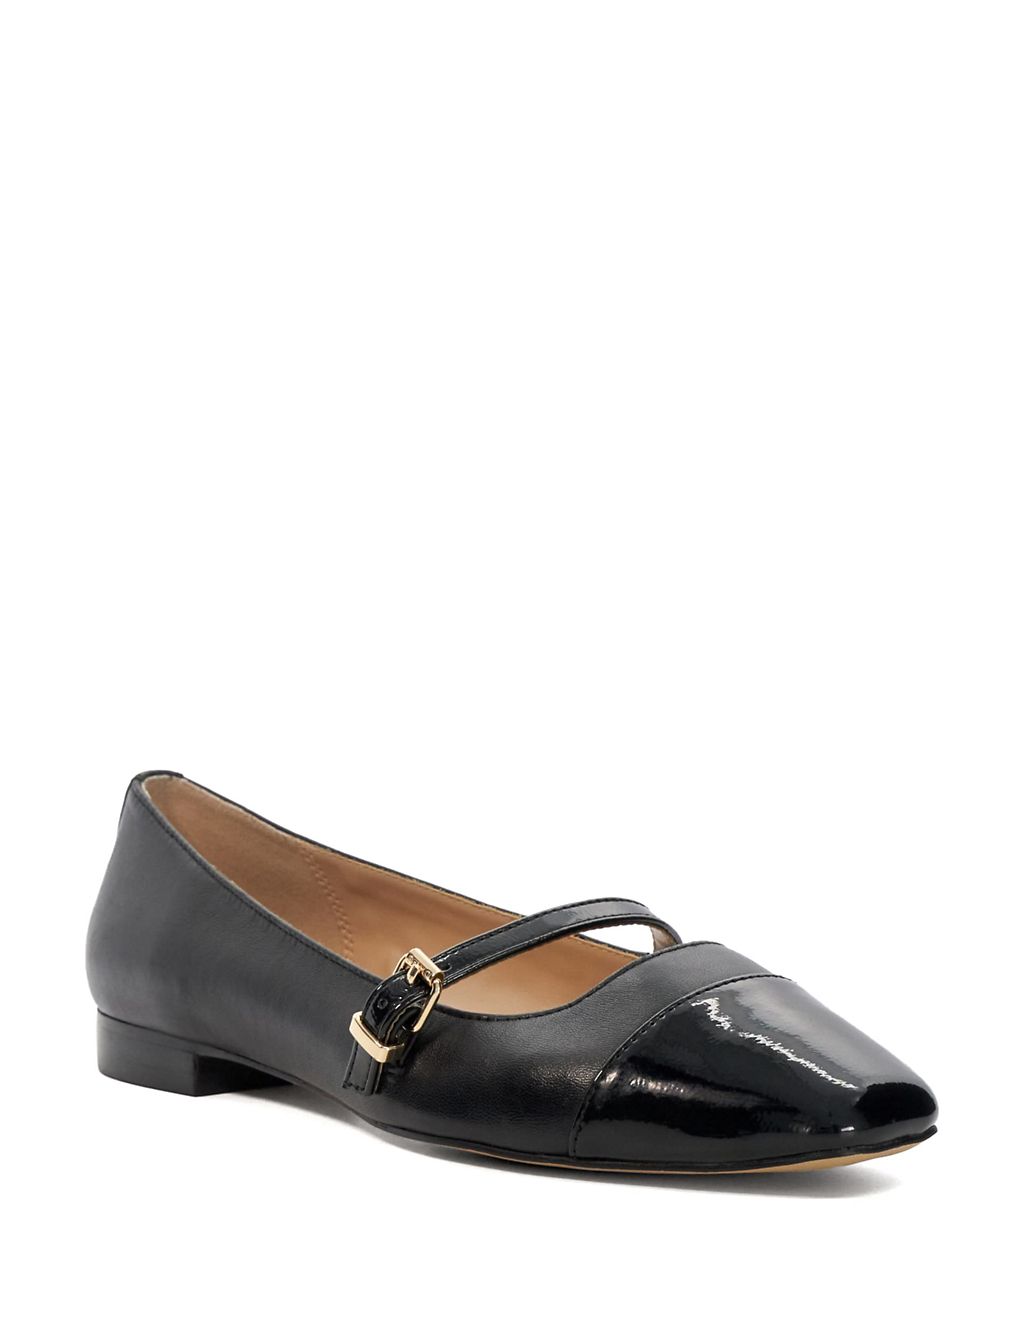 Leather Buckle Flat Ballet Pumps 1 of 5